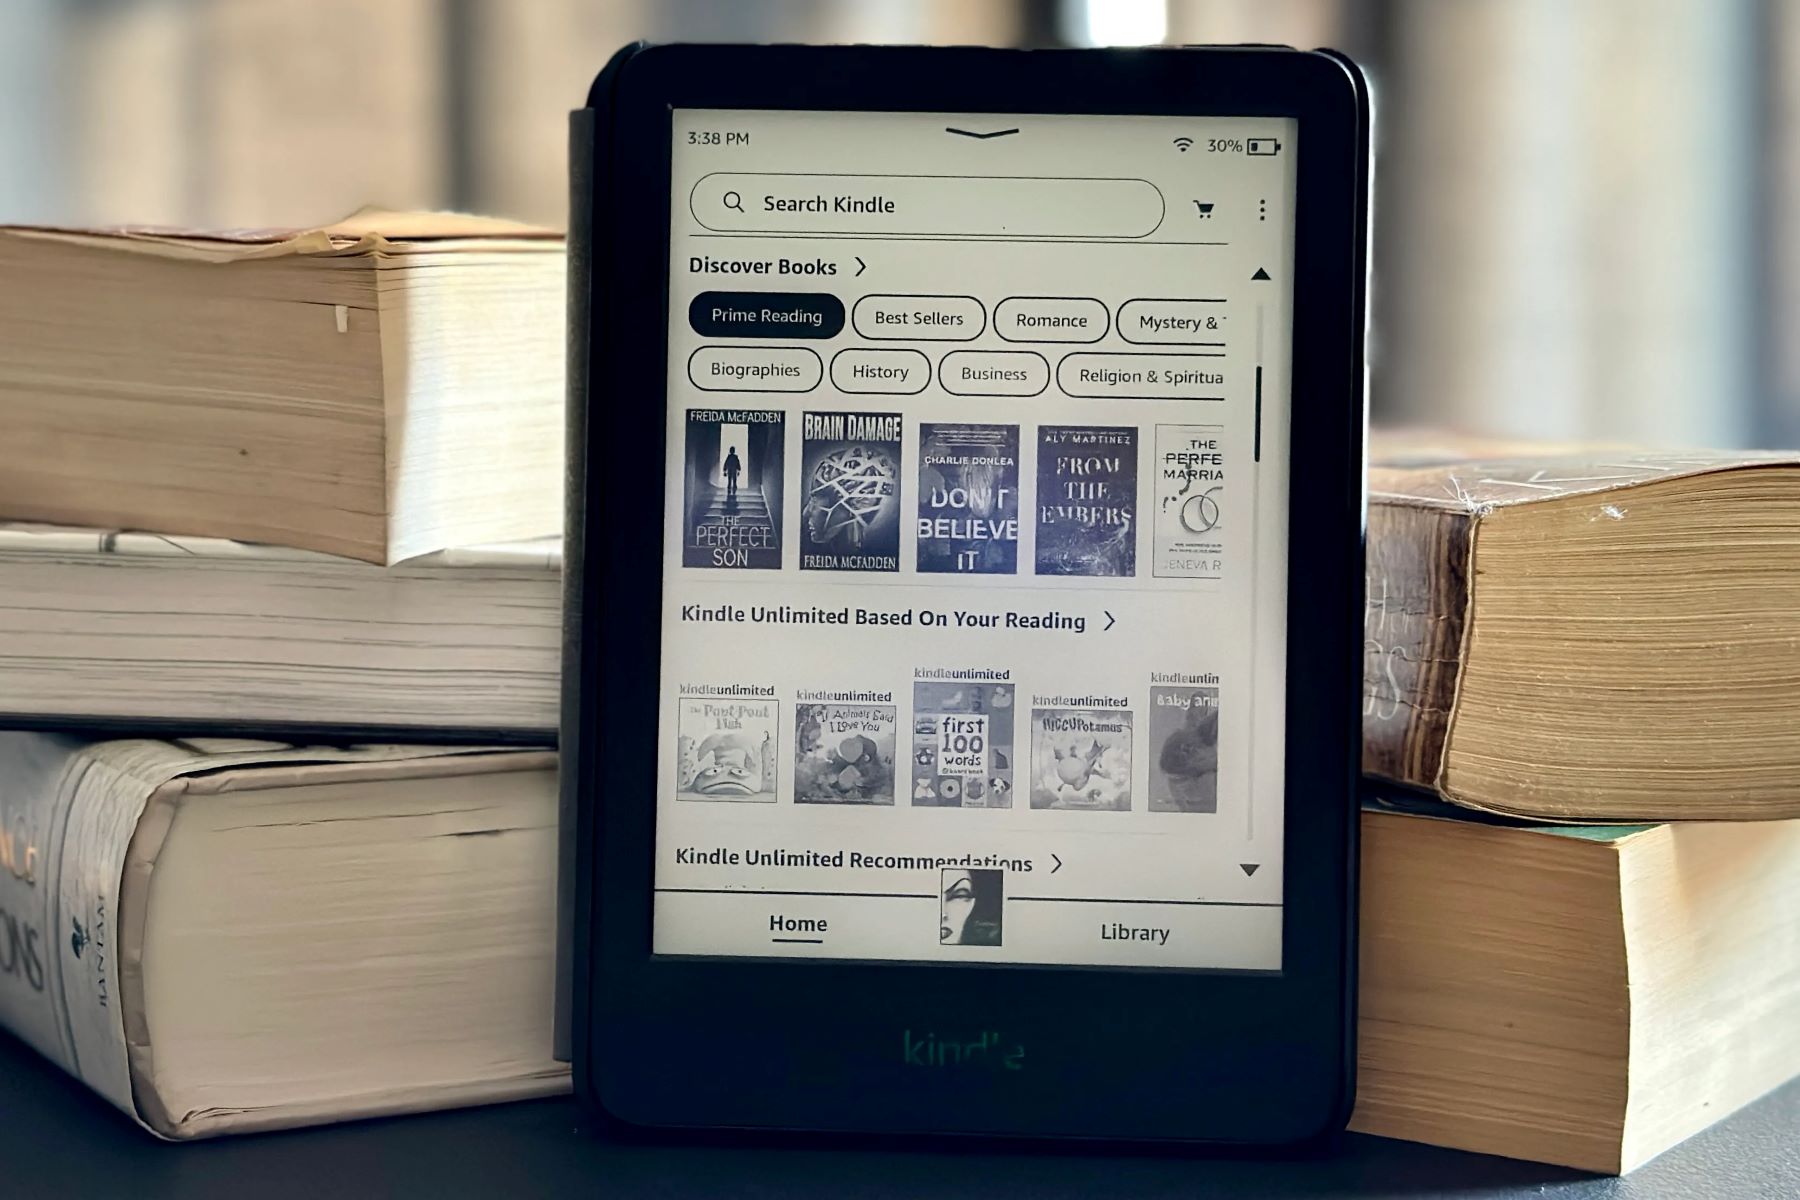 Where Are Kindle For PC Books Stored